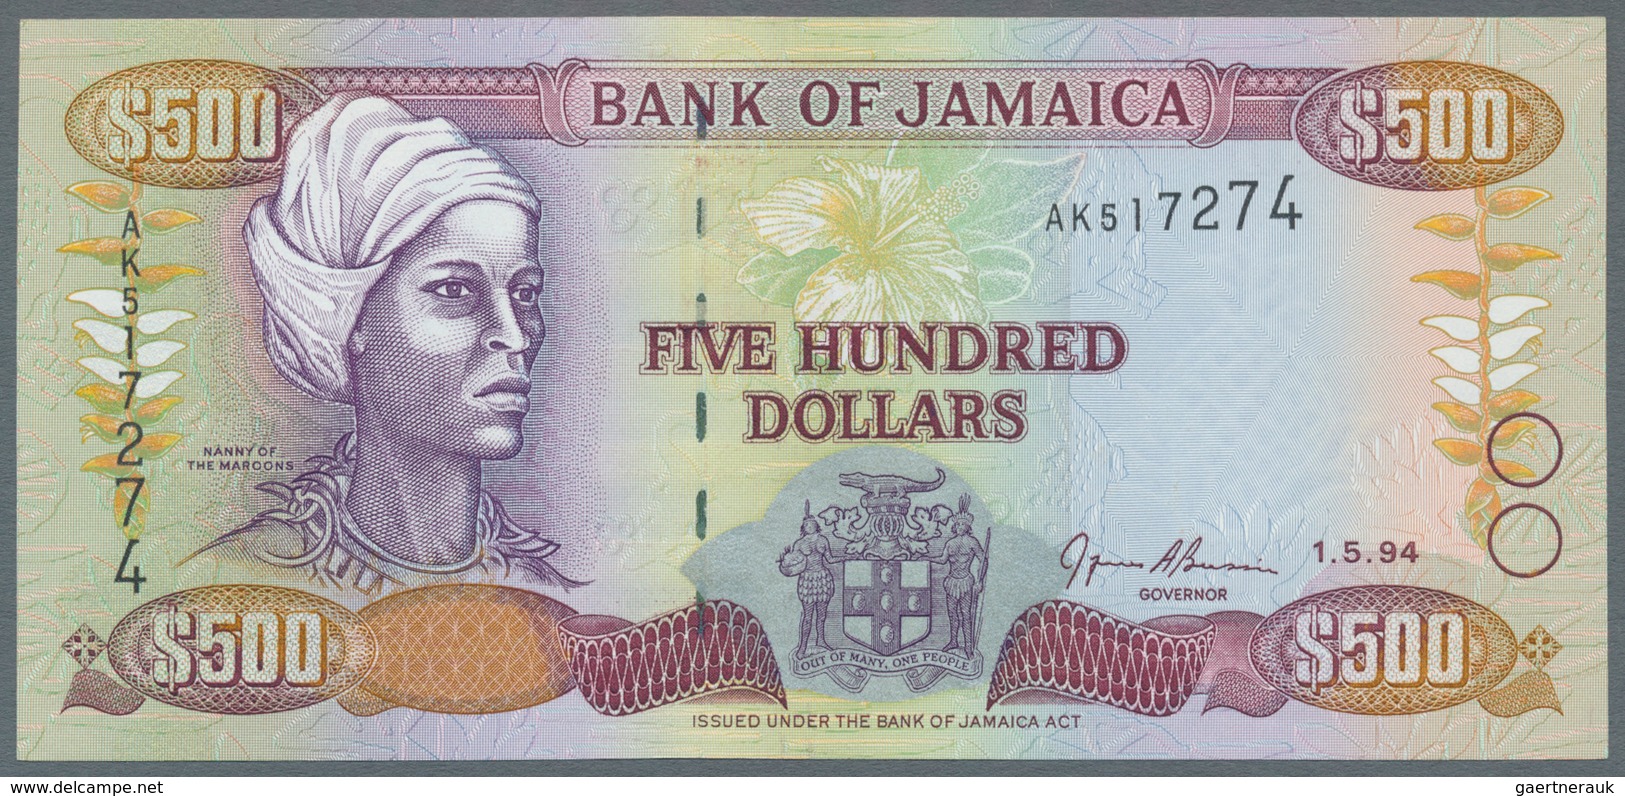 Jamaica: Lot With 38 Banknotes Jamaica 1 - 500 Dollars ND(1970's) - 1999 In F- To UNC Condition. (38 - Jamaica